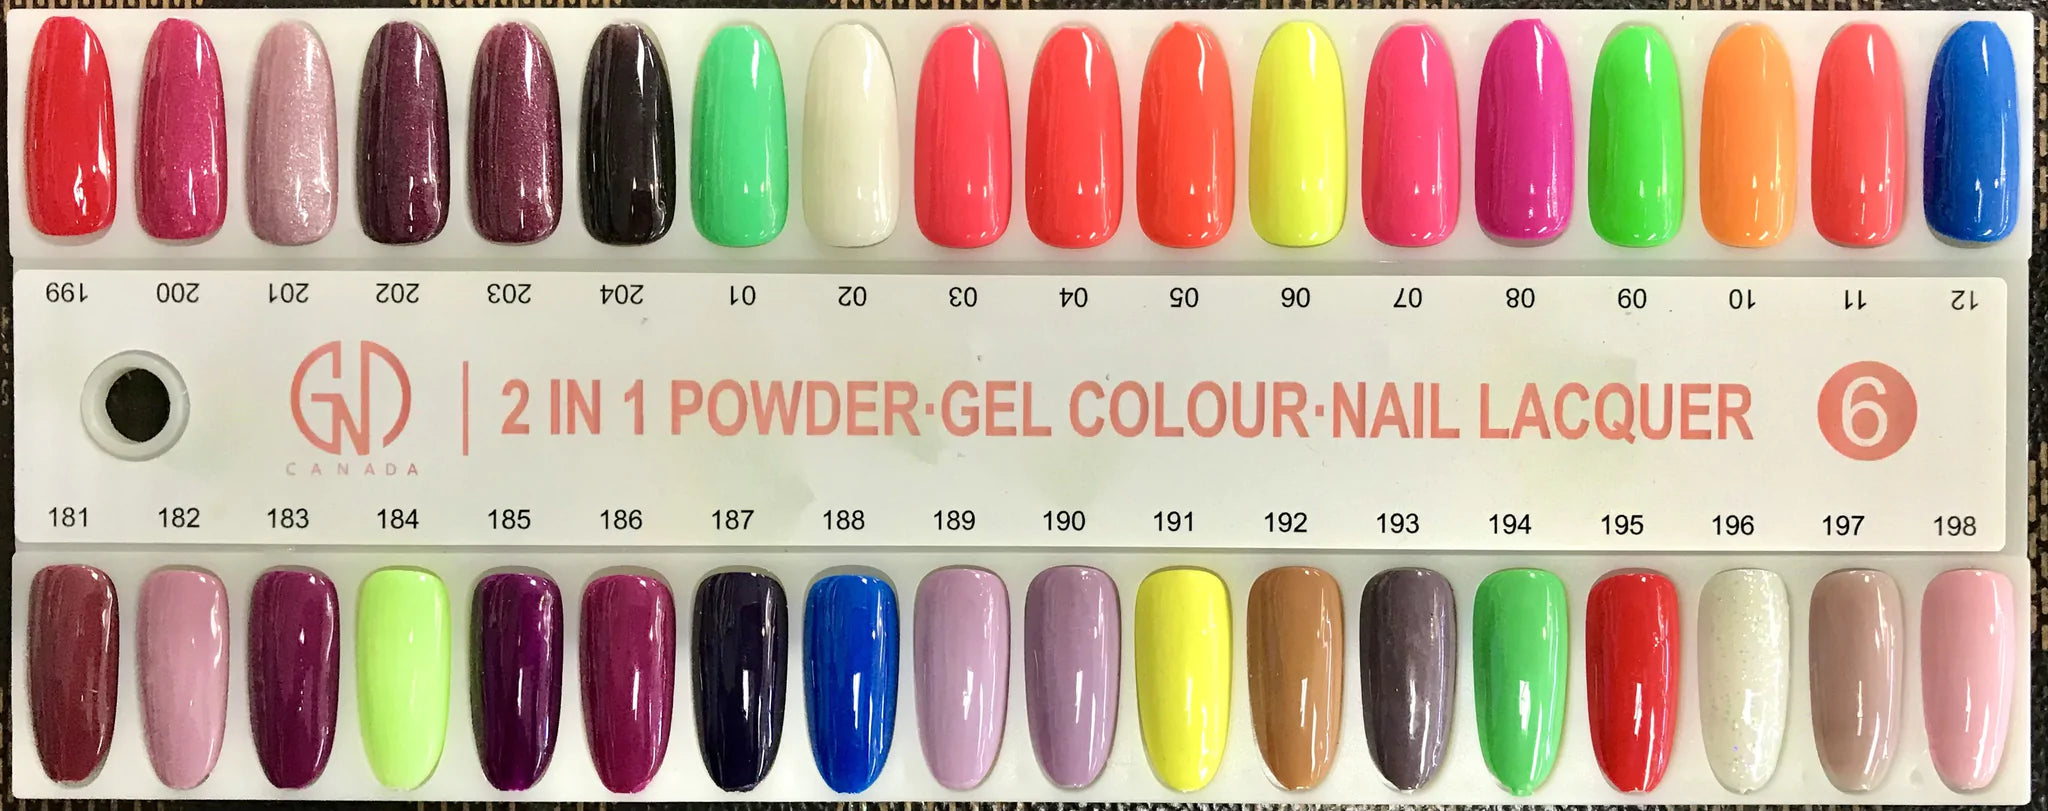 GND Duo Gel & Lacquer 189